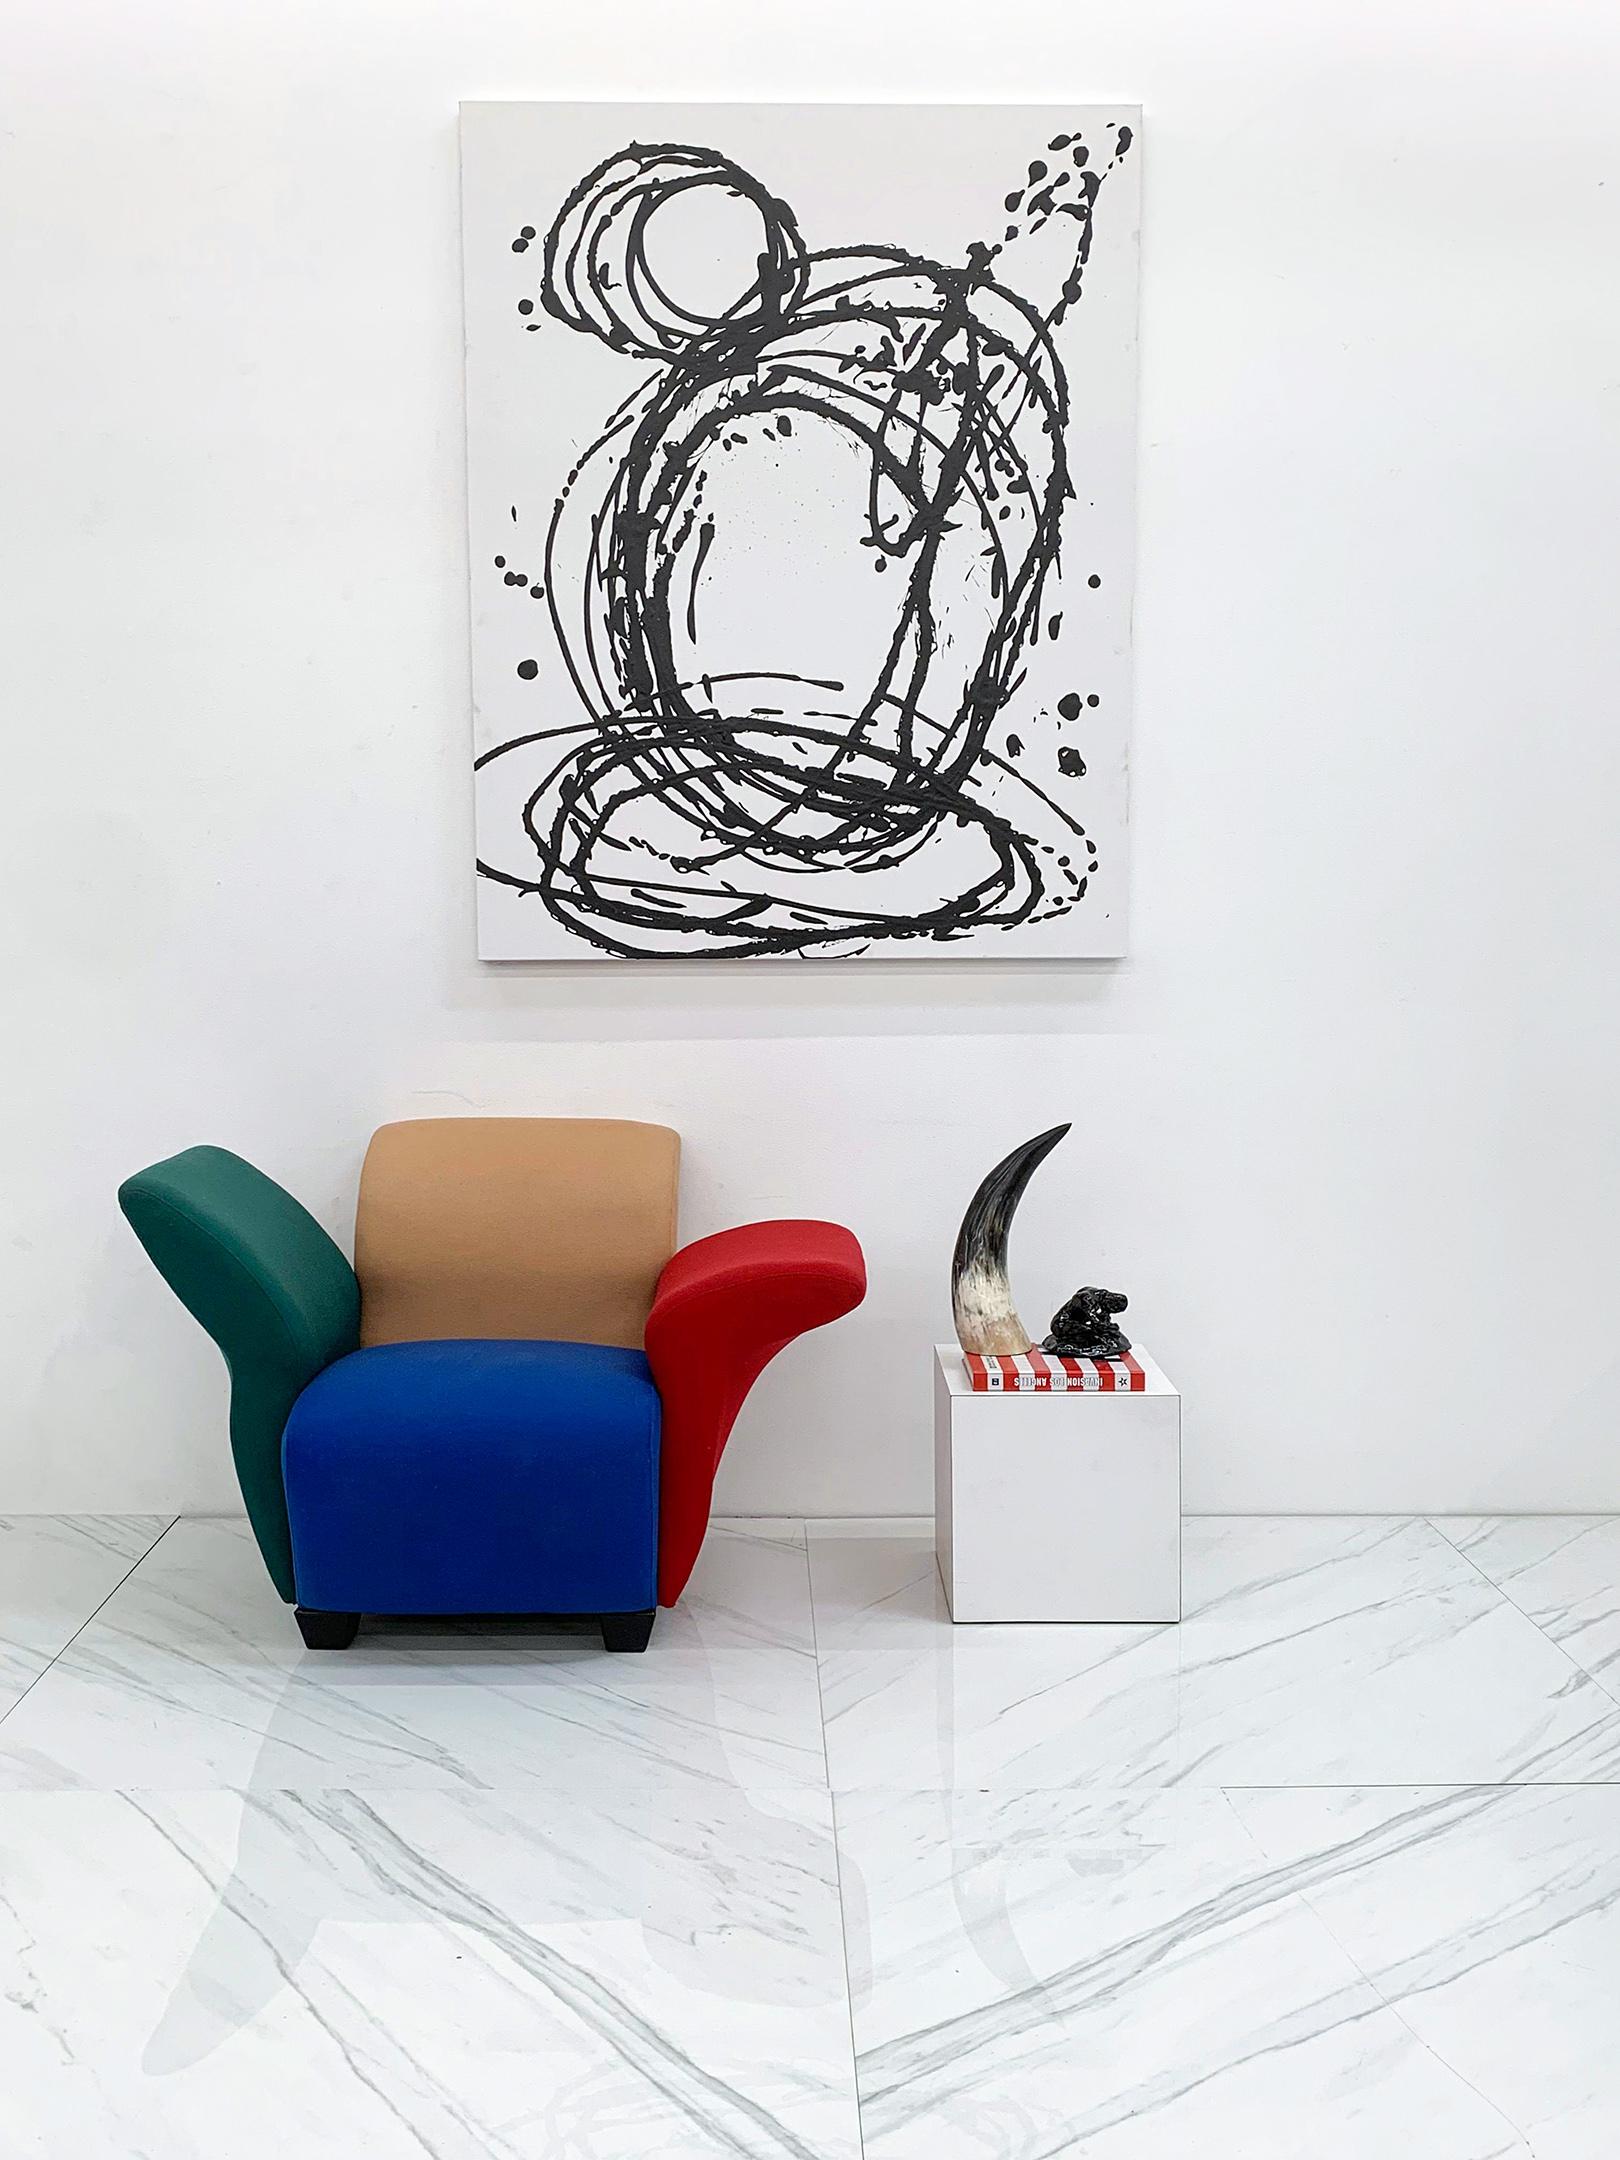 This David Burry lounge chair is absolutely stunning. Influenced by the Memphis Milano movement, David Burry designed this lounge chair in the late 1980's in Montreal, CA. With the squiggle lines, asymmetrical body and playful shape, this chair is a